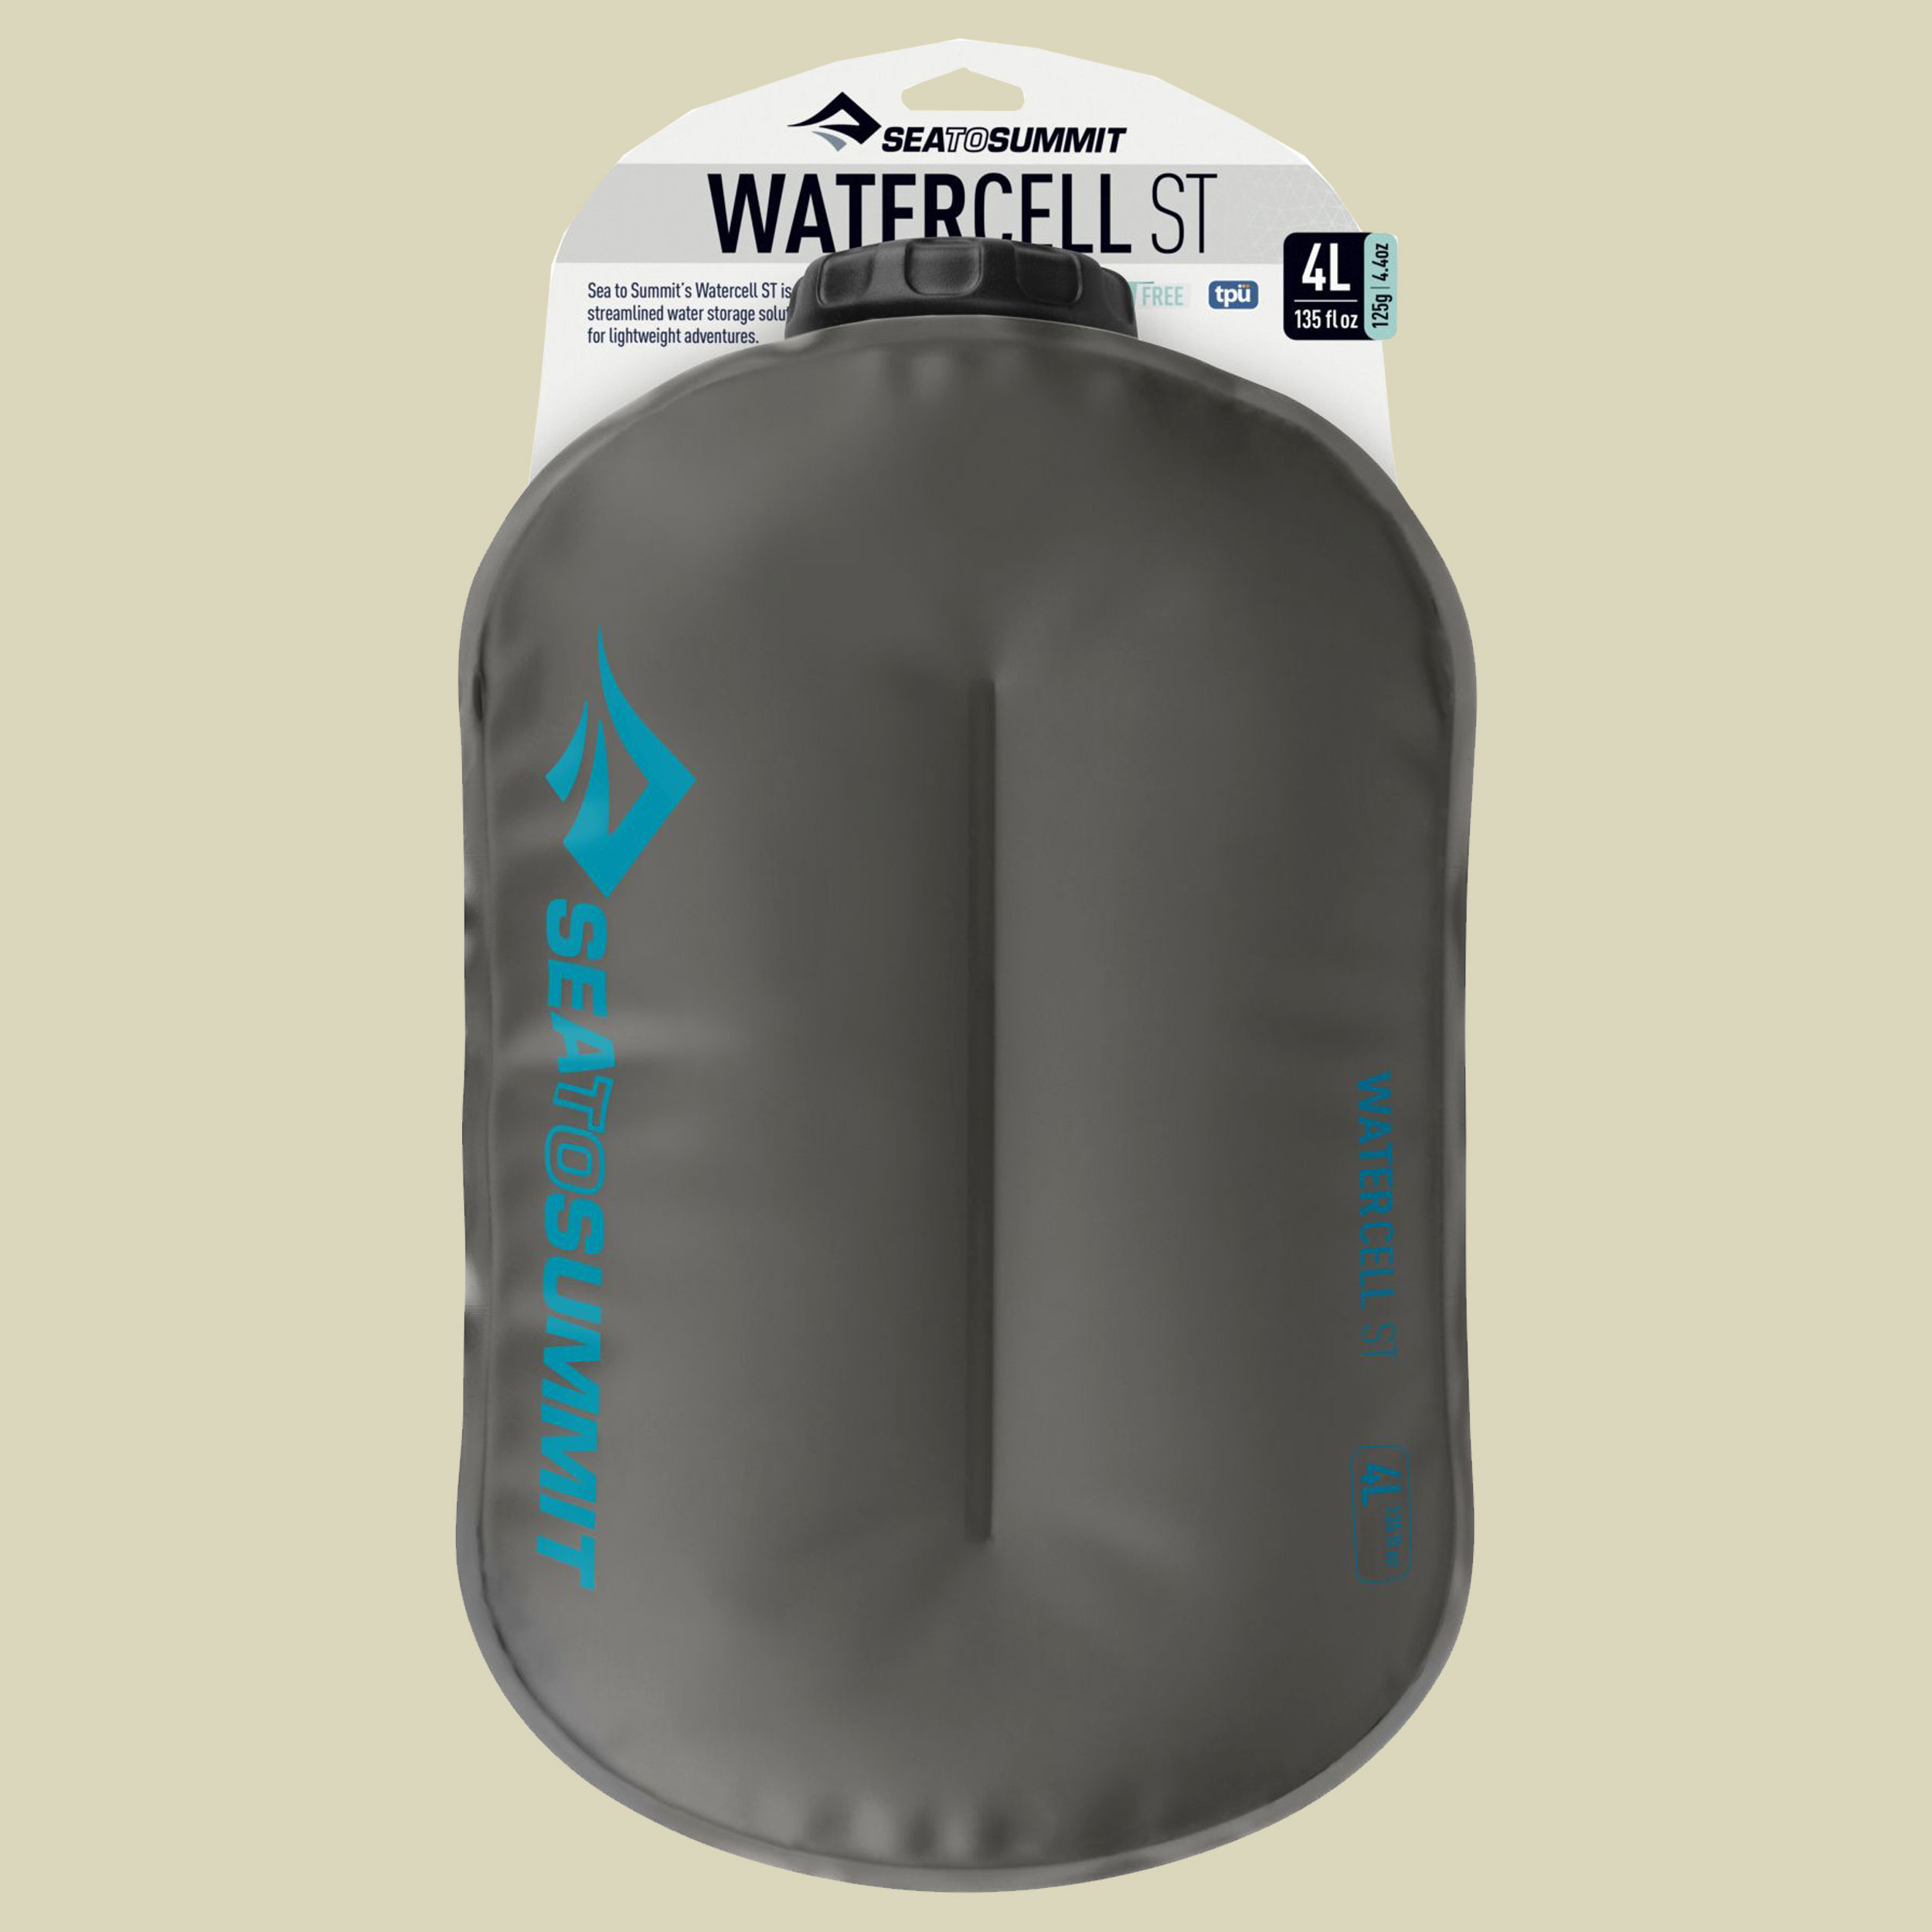 Watercell ST